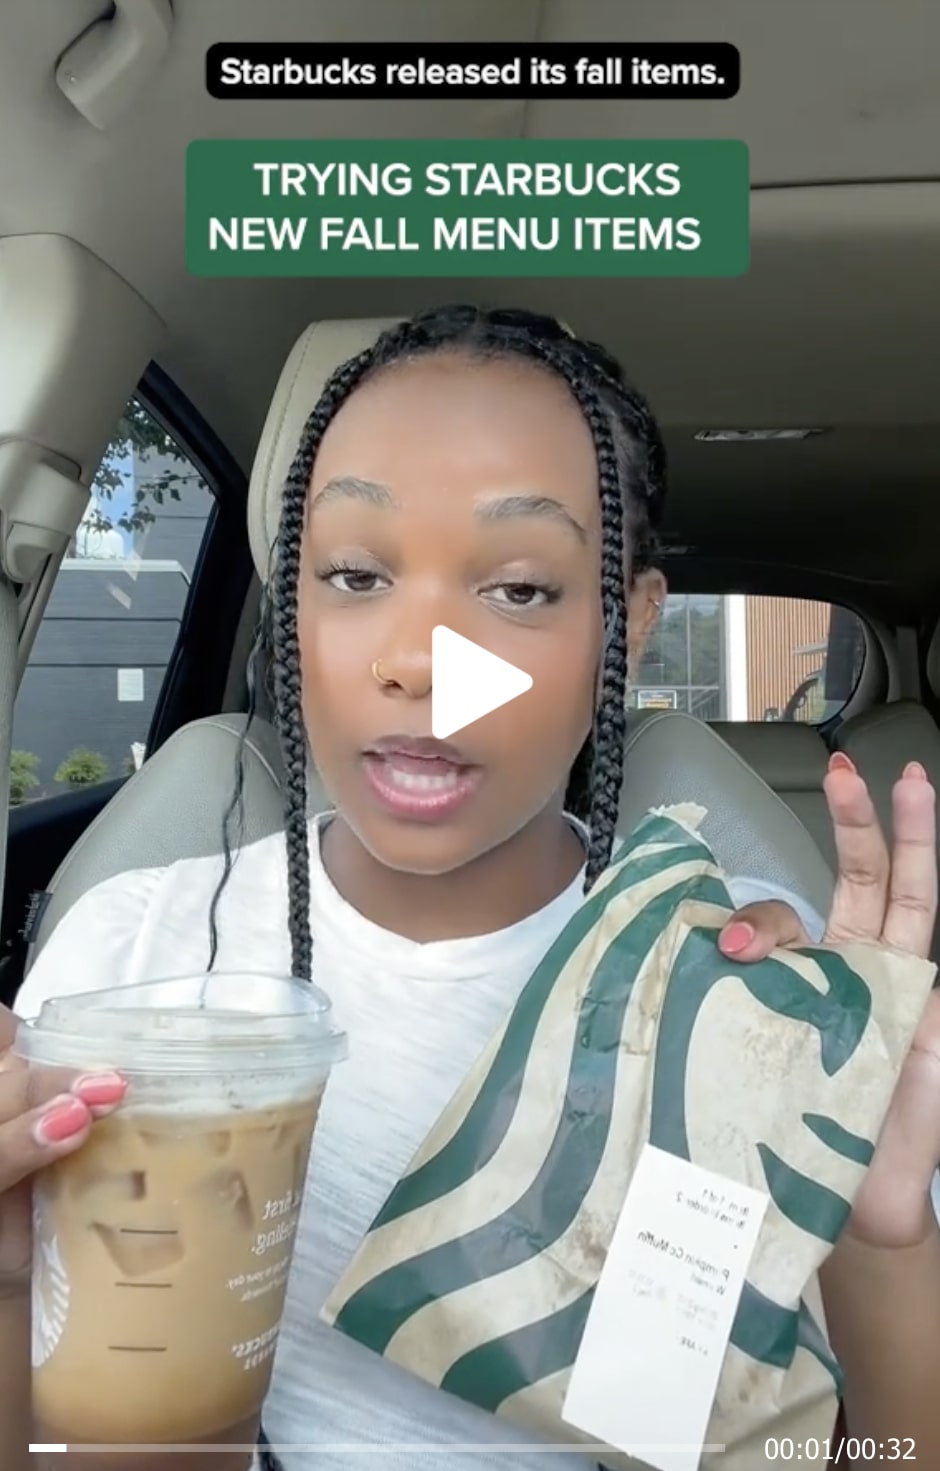 A video from the customer talking about trying Starbucks new fall menu items